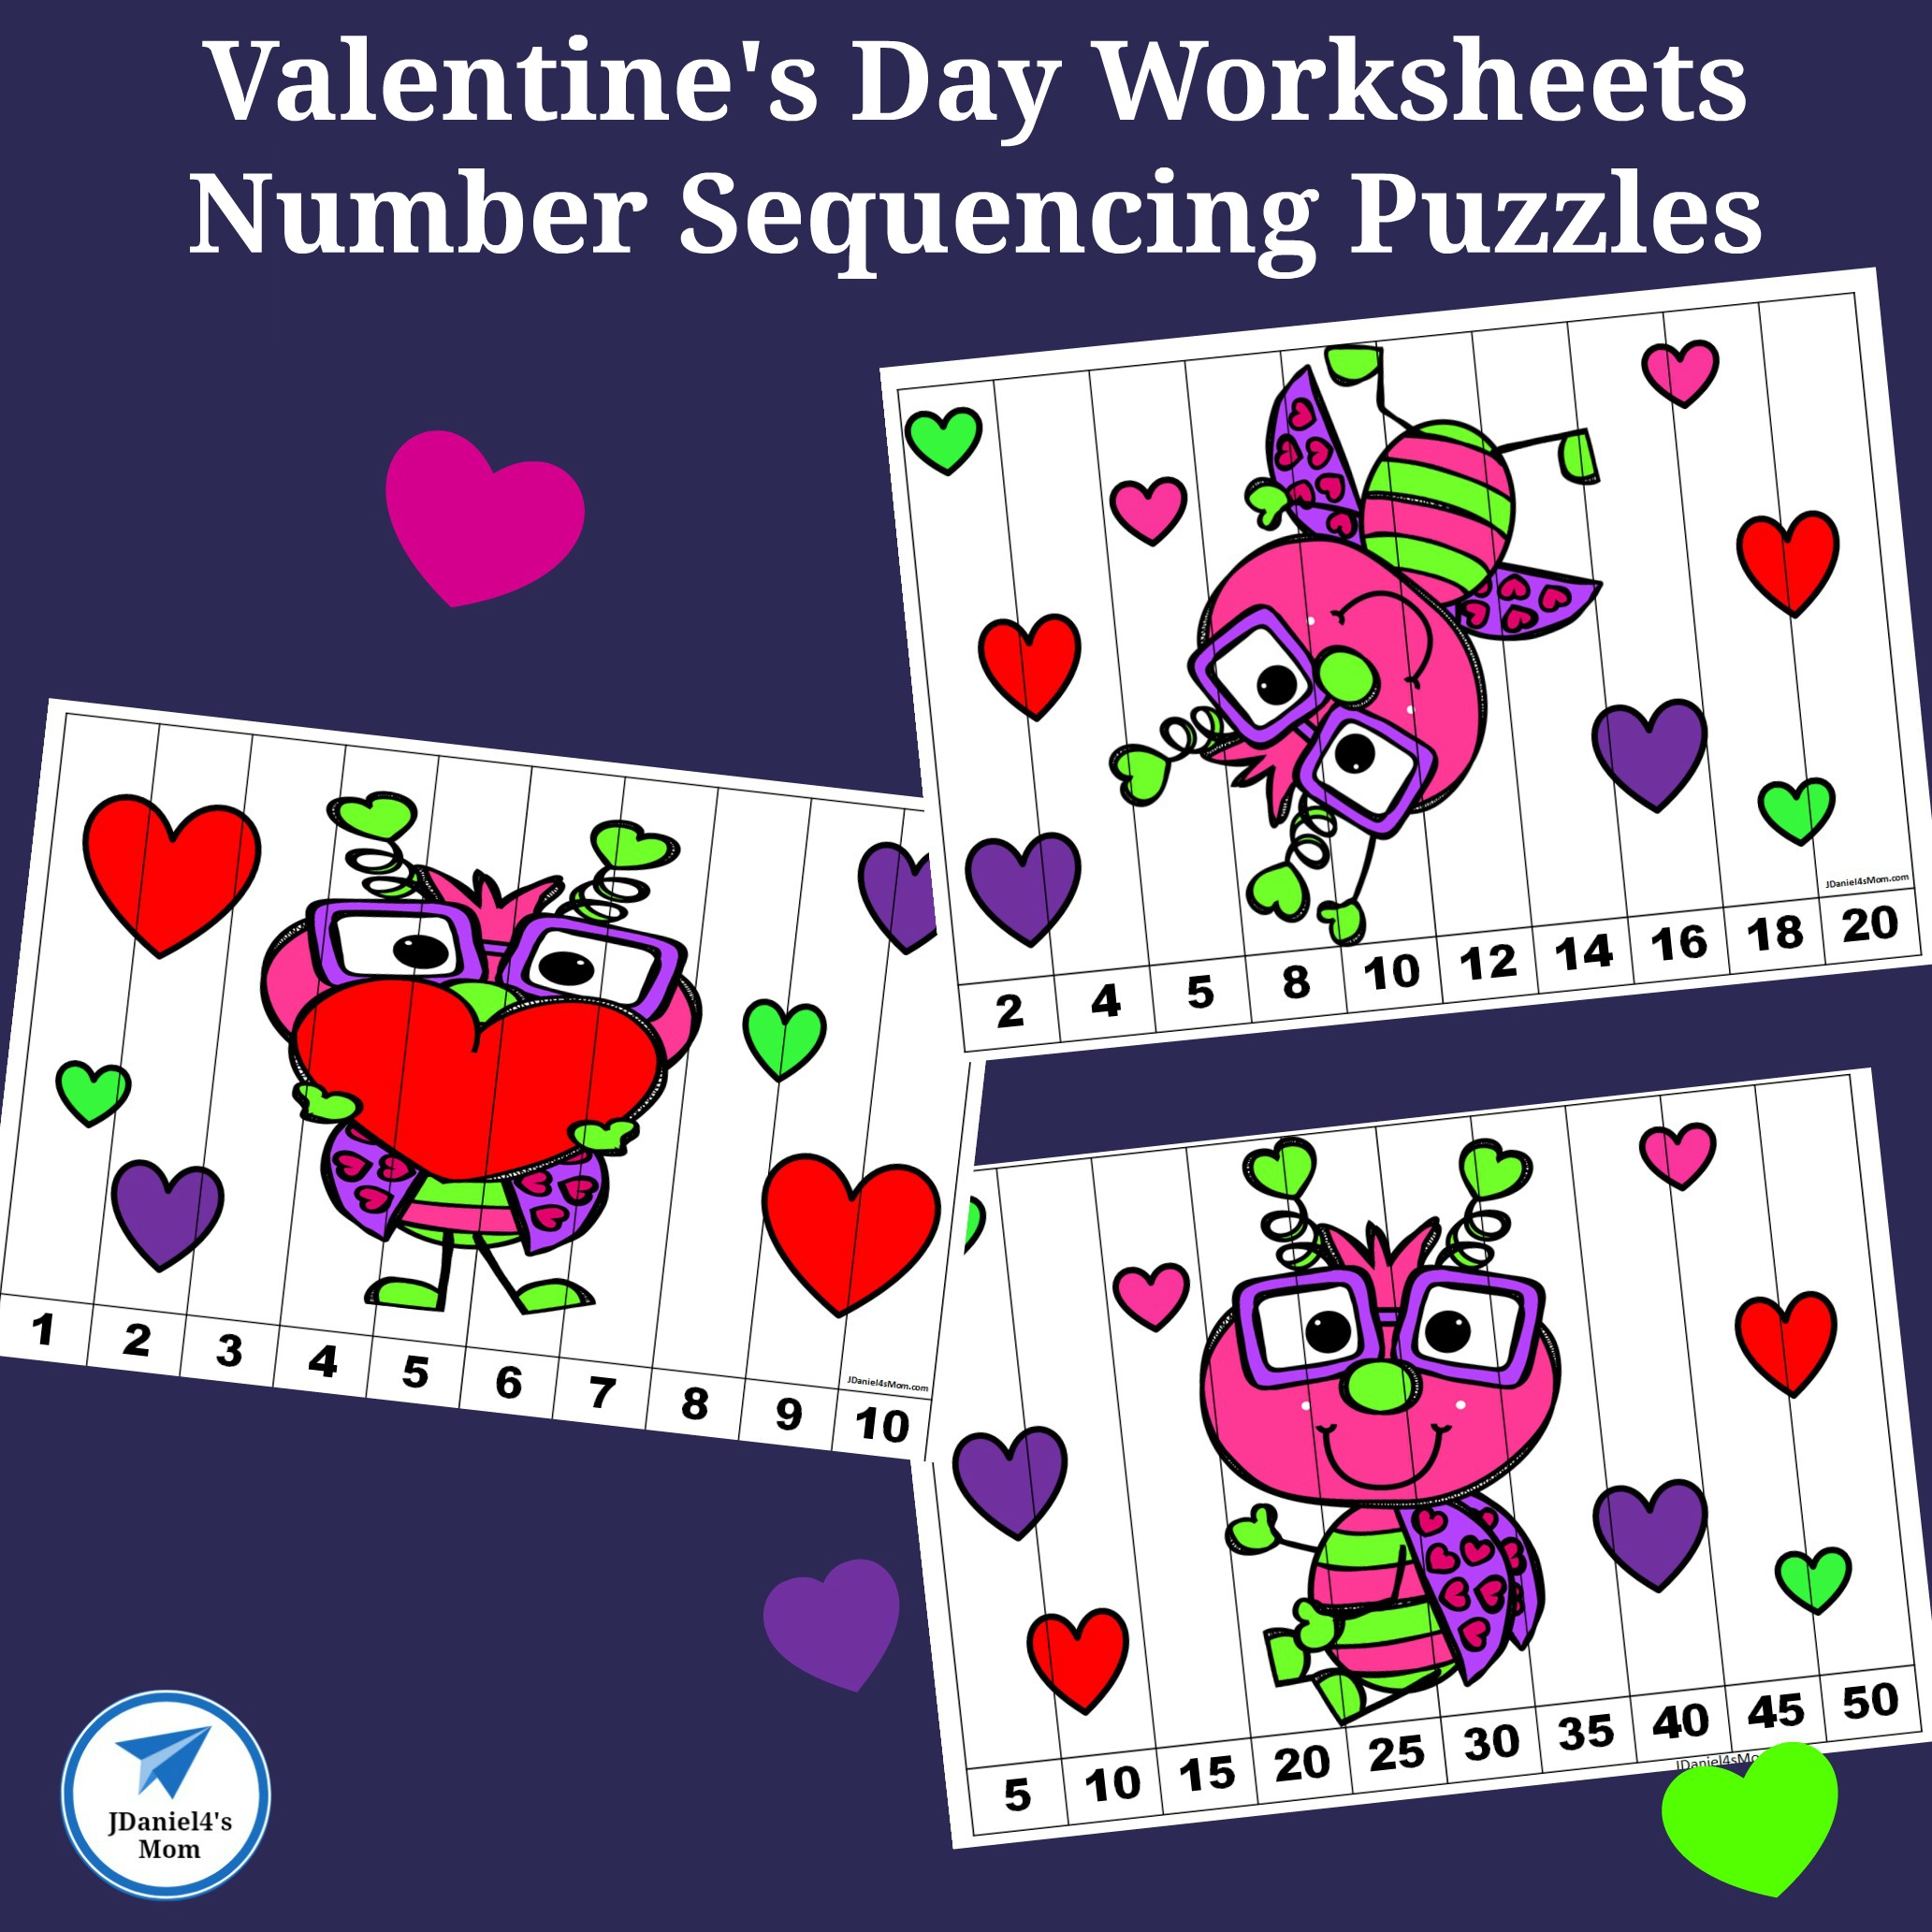 valentine-s-day-worksheets-number-sequencing-puzzles-jdaniel4s-mom